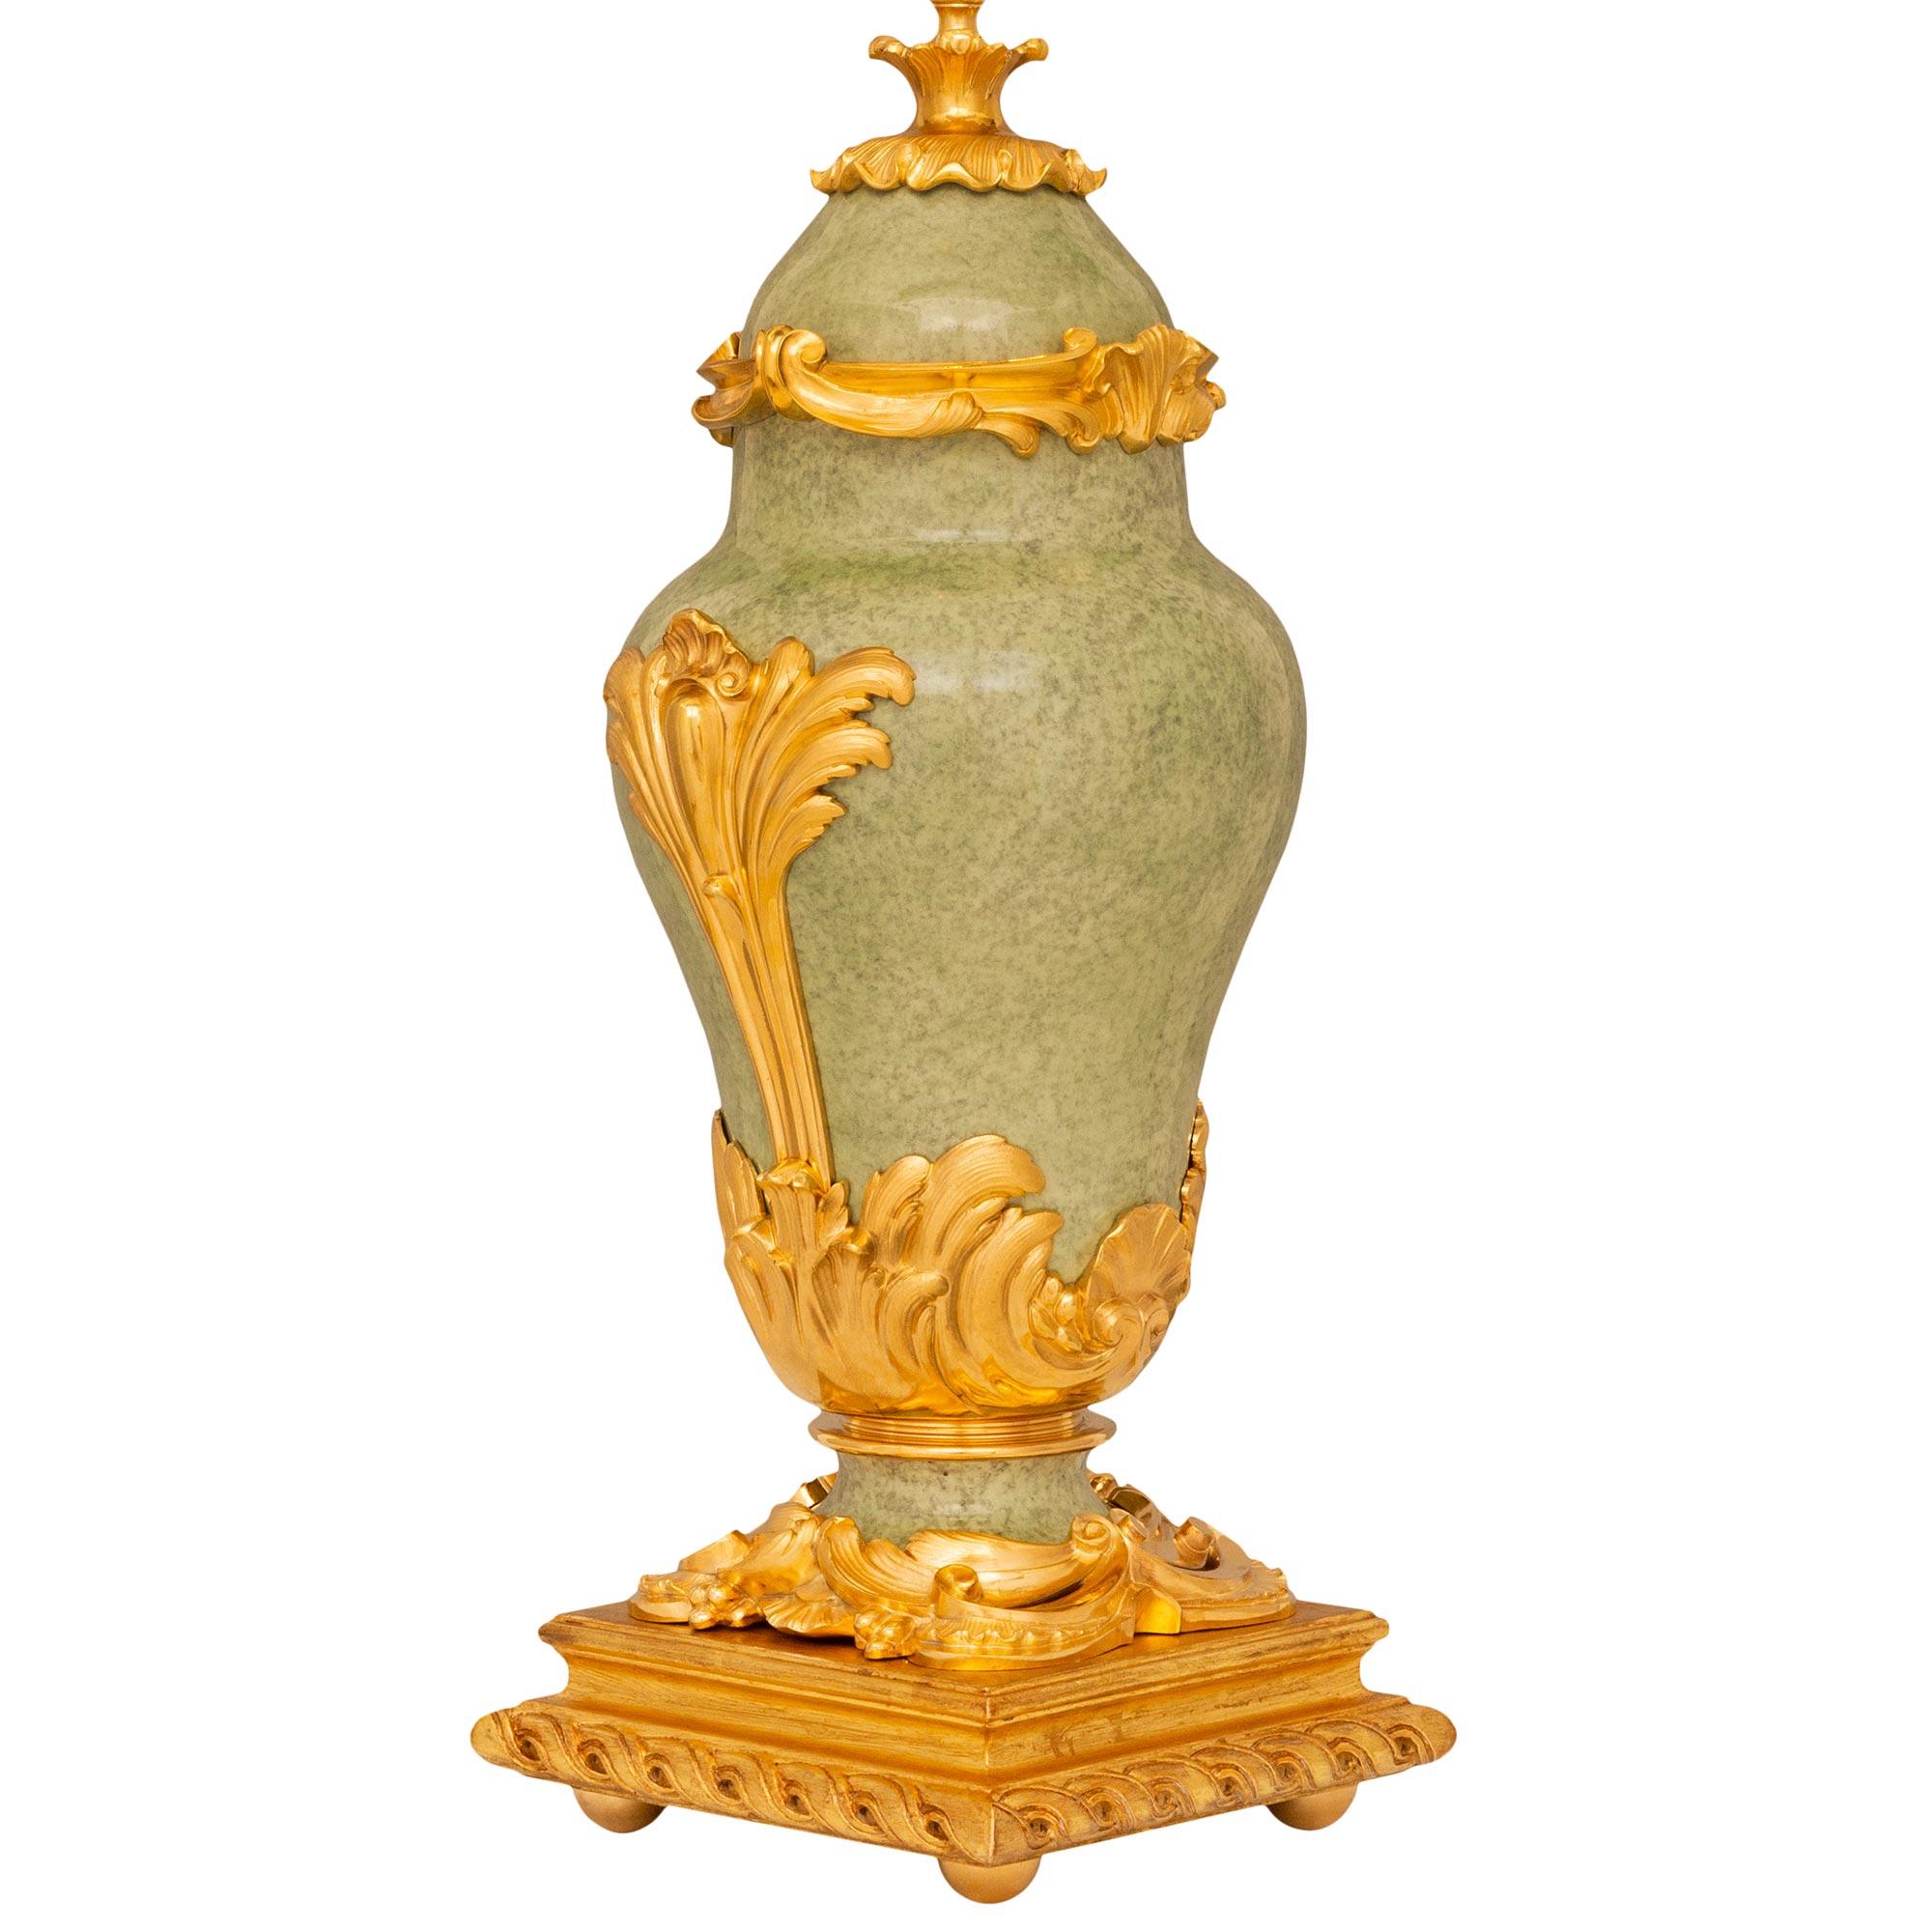 A beautiful and finely detailed pair of French 19th century Louis XV st. light green fire glazed Porcelain, Ormolu, and Giltwood lamps. Each lamp is raised by a square Giltwood platform with a carved spiral design and supported by four round Ormolu